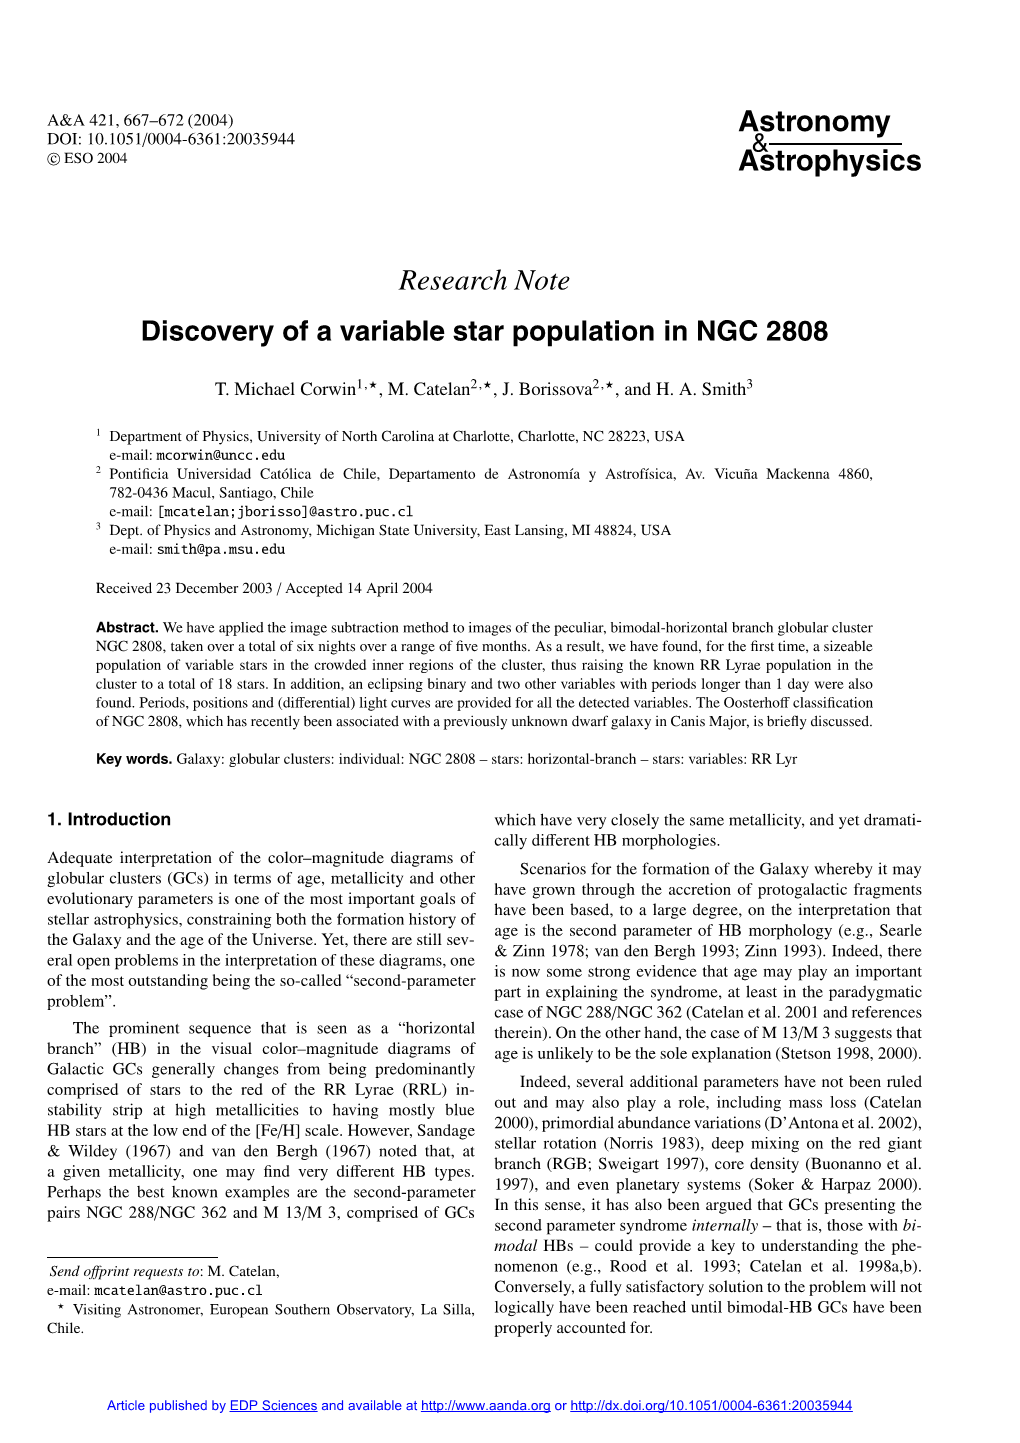 Discovery of a Variable Star Population in NGC 2808